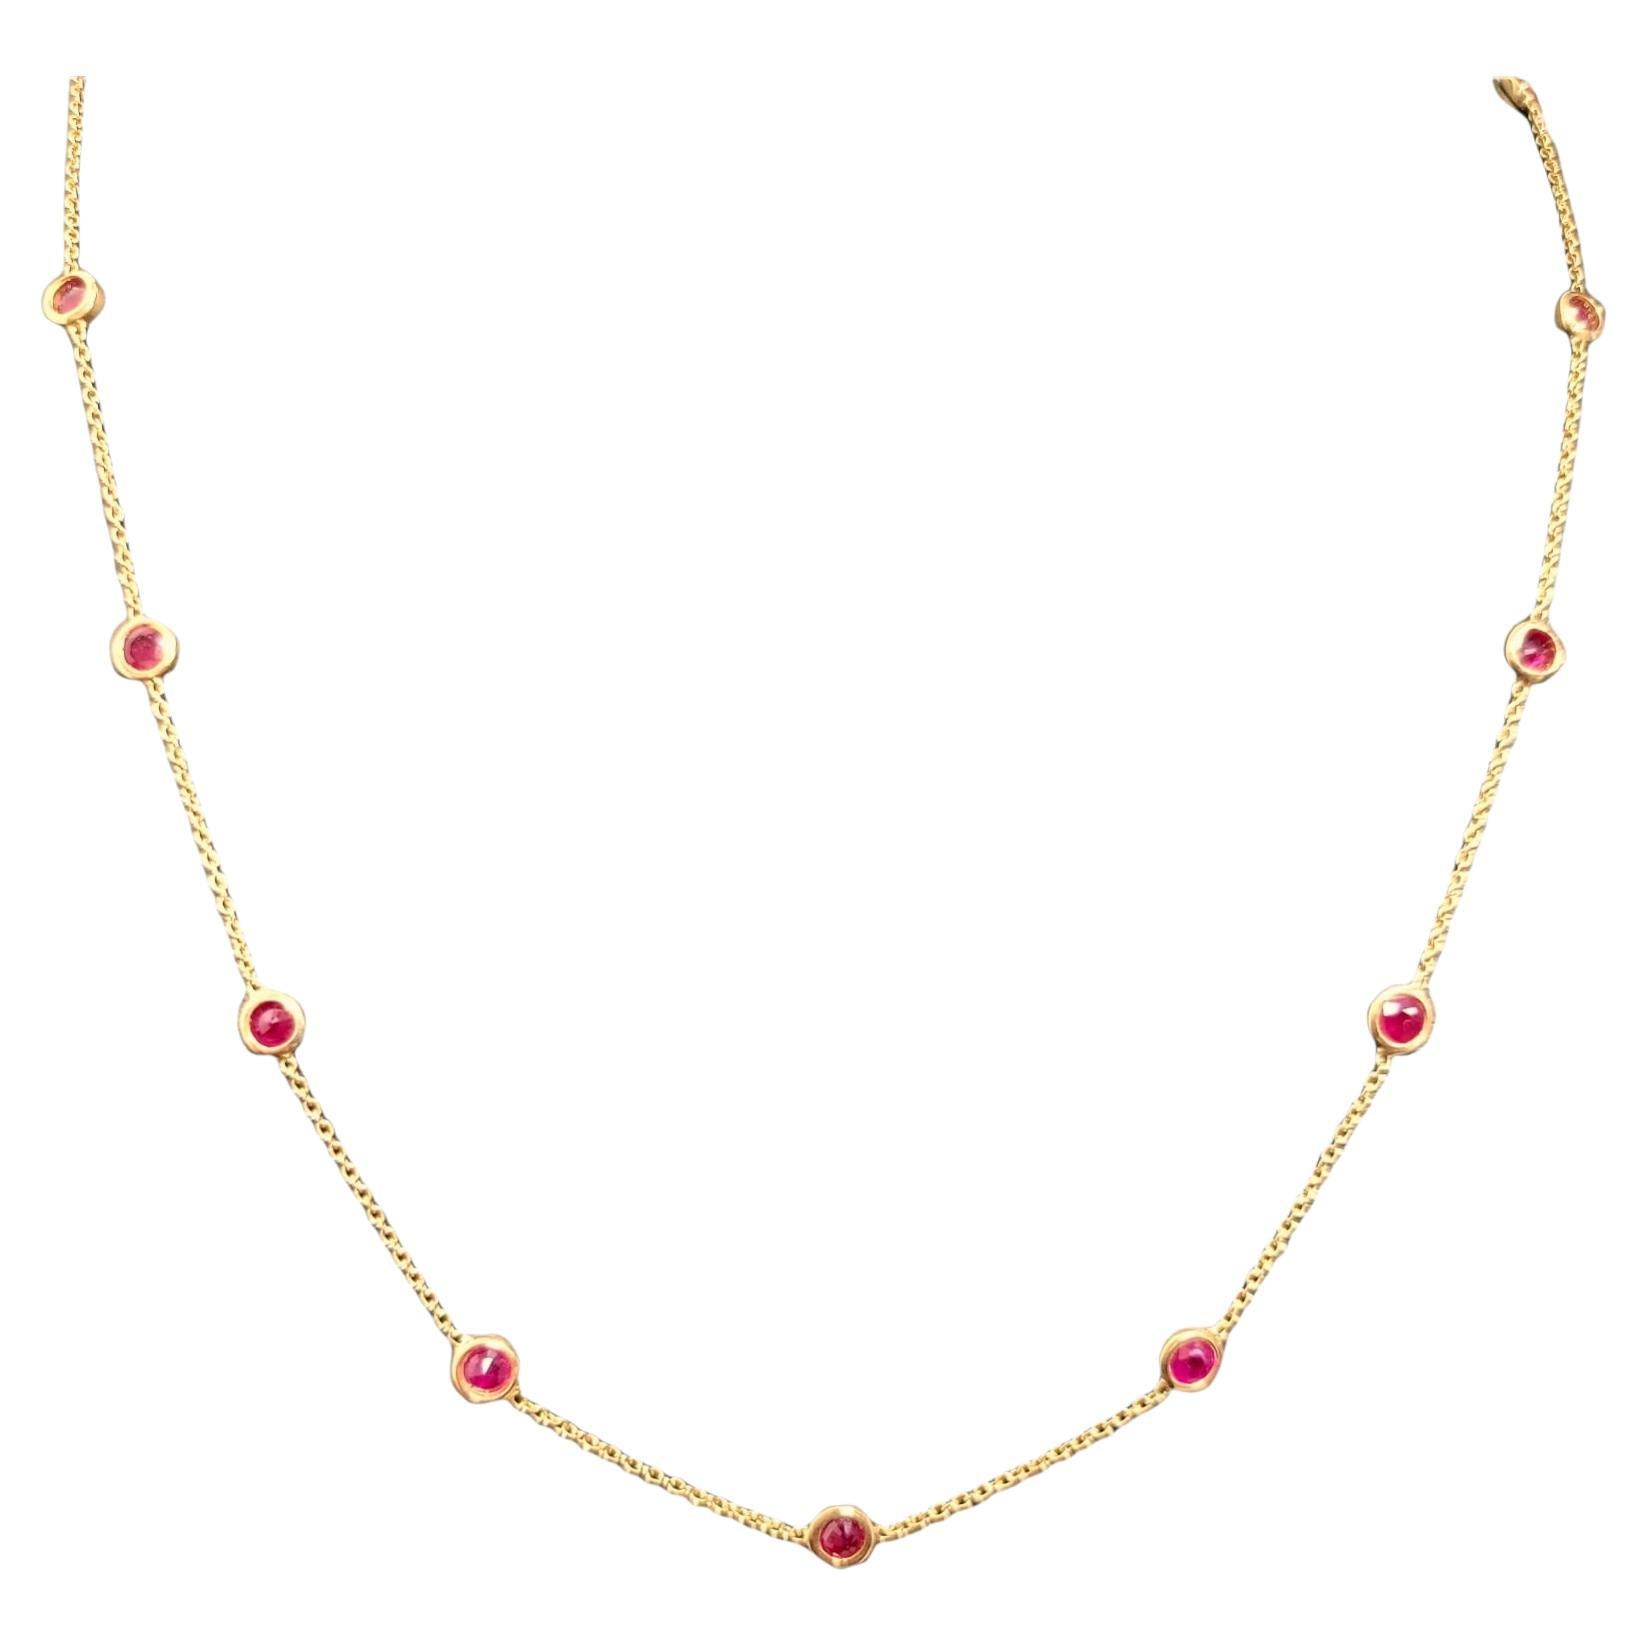 4.25 Carats Total Round Mixed Cut Ruby Station Necklace in 14 Karat Yellow Gold